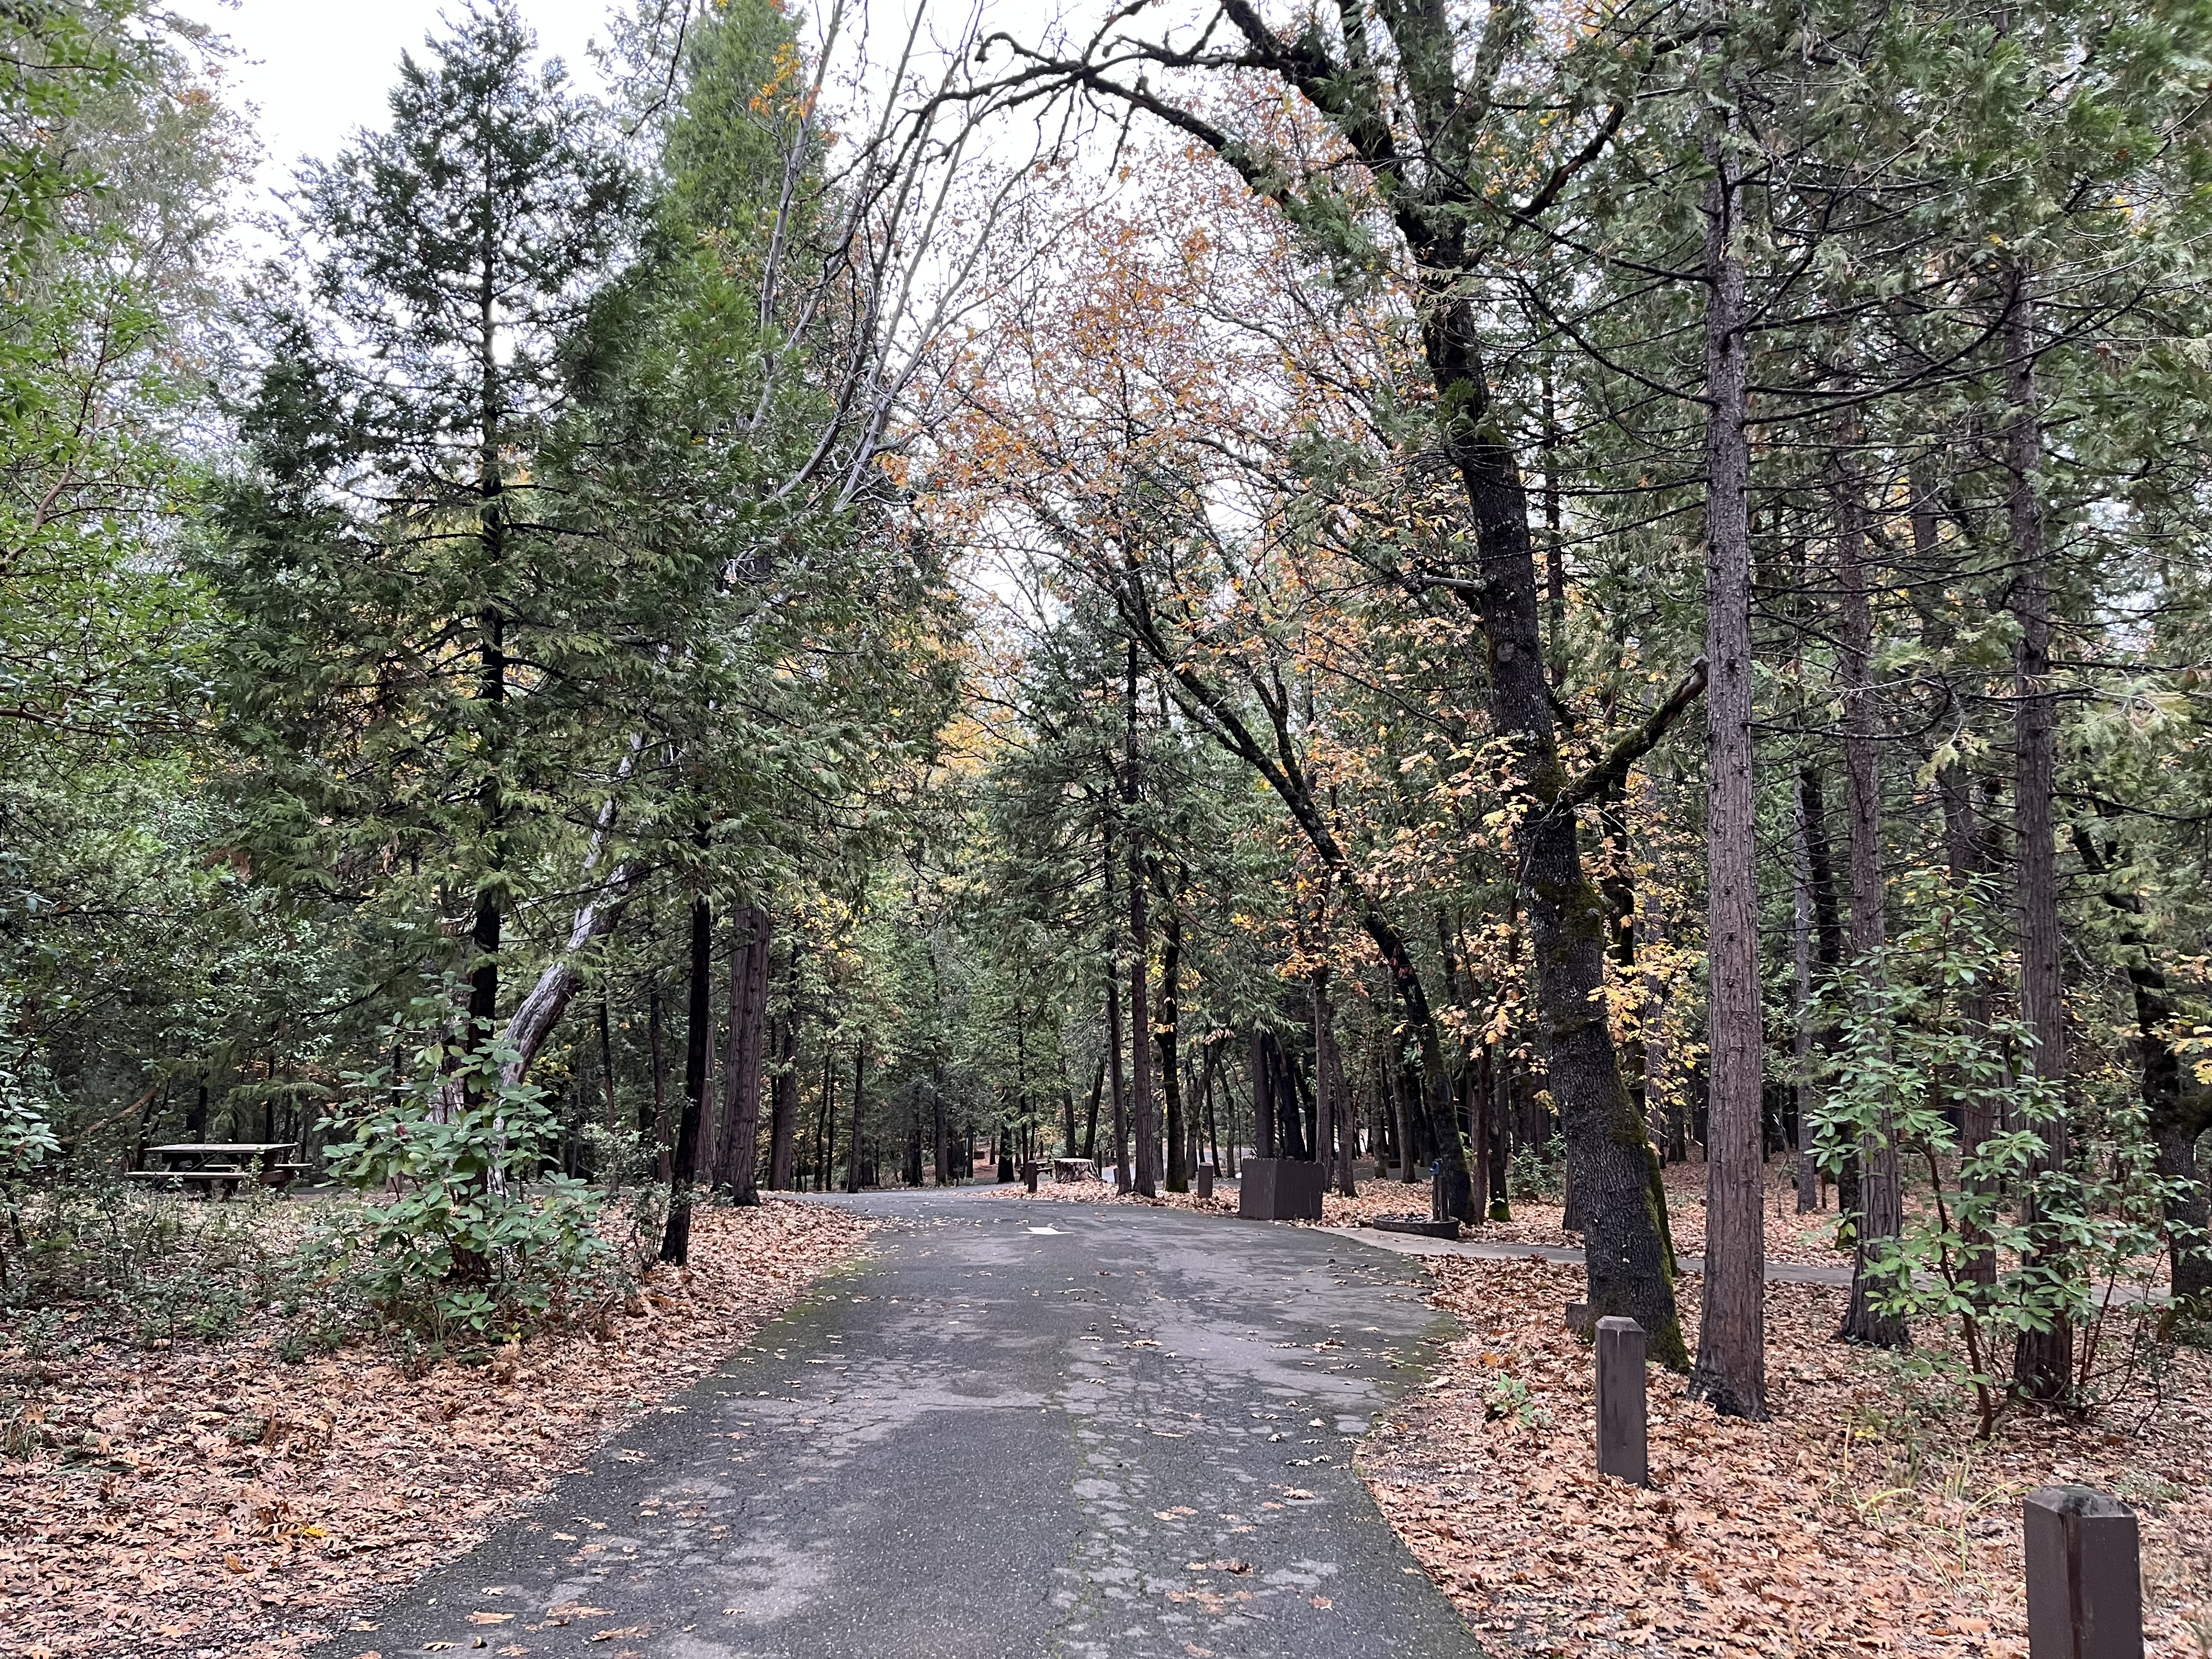 Paved road surrounded by trees